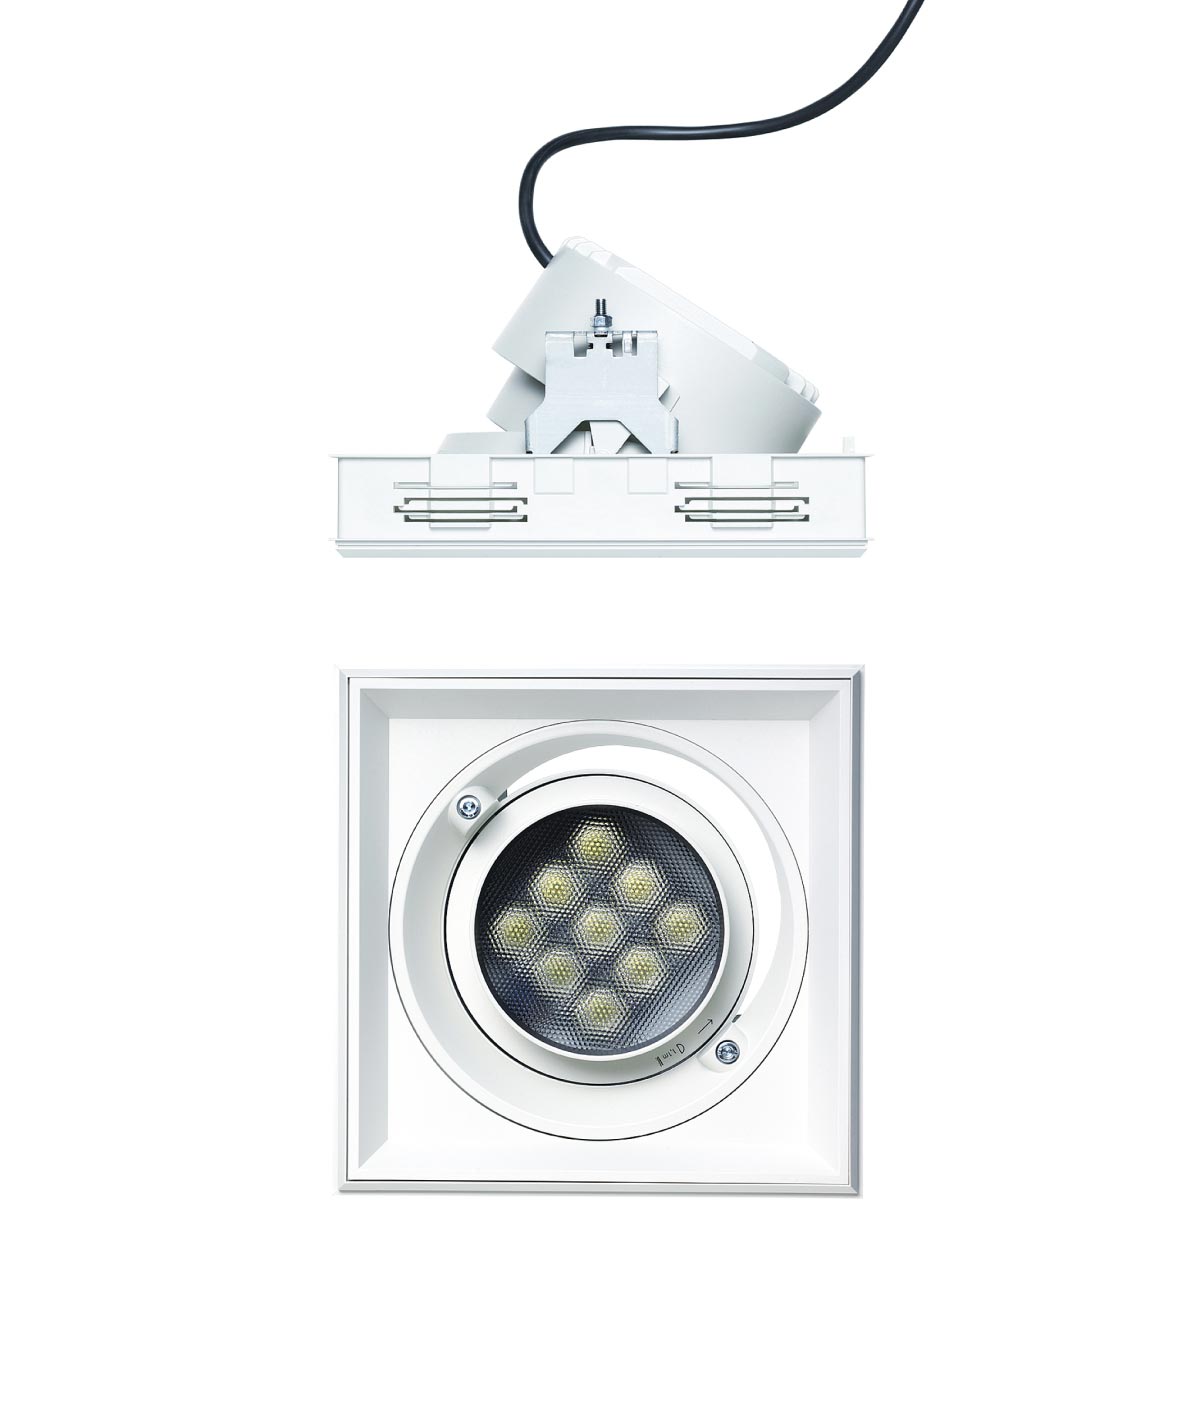 Quintessence Square Recessed Adjustable Spotlight With Regressed Mounting Tray Spot Beam 6W LED 3000K ECG White Trim F/P